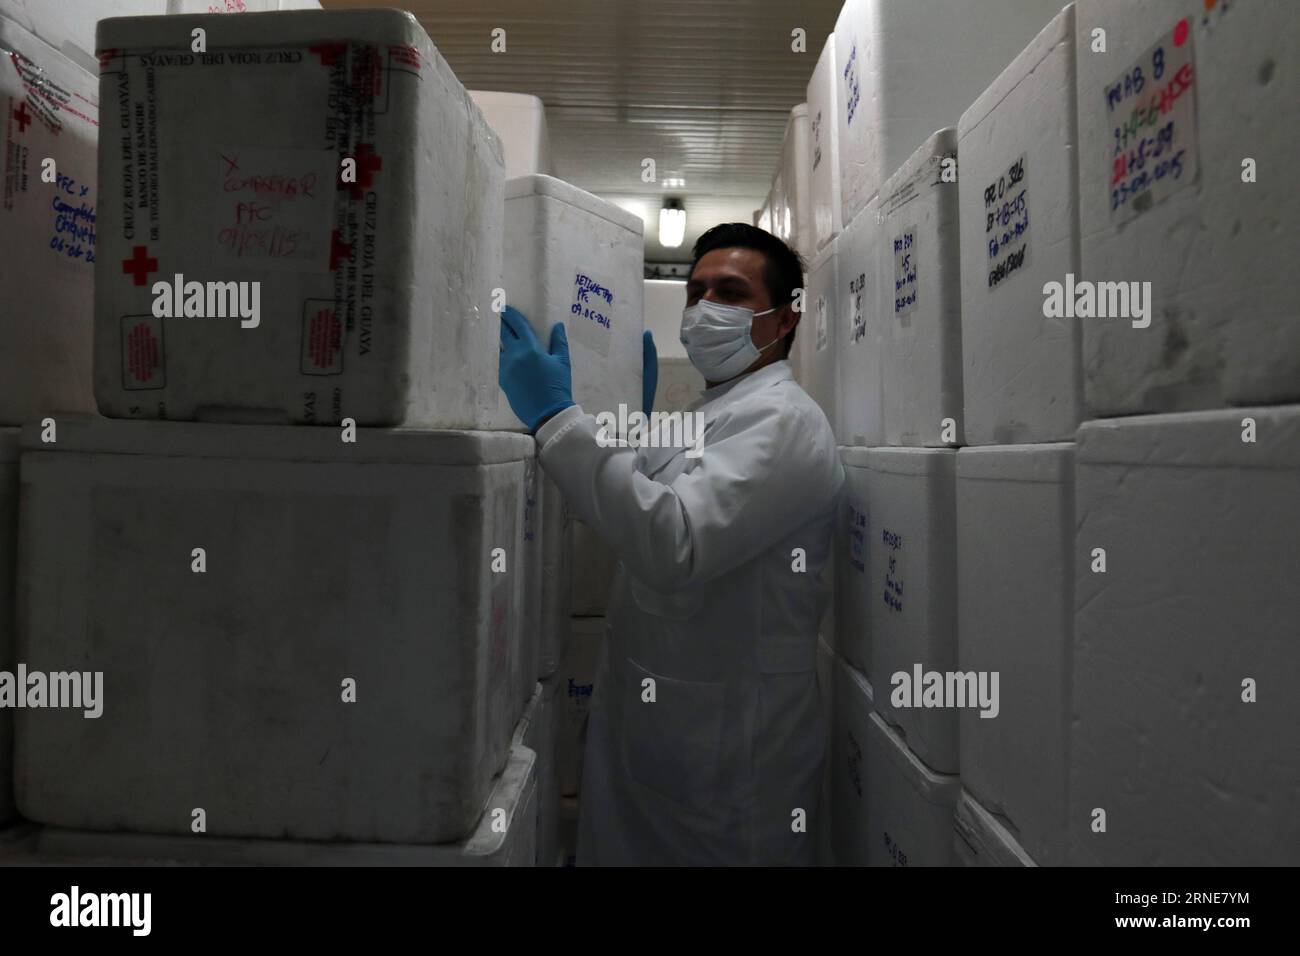 (160614) -- QUITO, June 11, 2016 -- Image taken on June 11, 2016 shows Pablo Delgado, technologist of the Ecuadorian Red Cross lab, arranging boxes with blood packages ready to be used in Quito, Ecuador. The World Blood Donor Day is commemorated yearly on June 11, and in 2016, the theme of the campaign is Blood connects us all . The World Health Organization (WHO) has also adopted for this day the slogan Share life, give blood , with the purpose of raising awareness on the importance of the voluntary donation systems as a way of promoting the community cohesion. Santiago Armas) (da) (vf) ECUAD Stock Photo